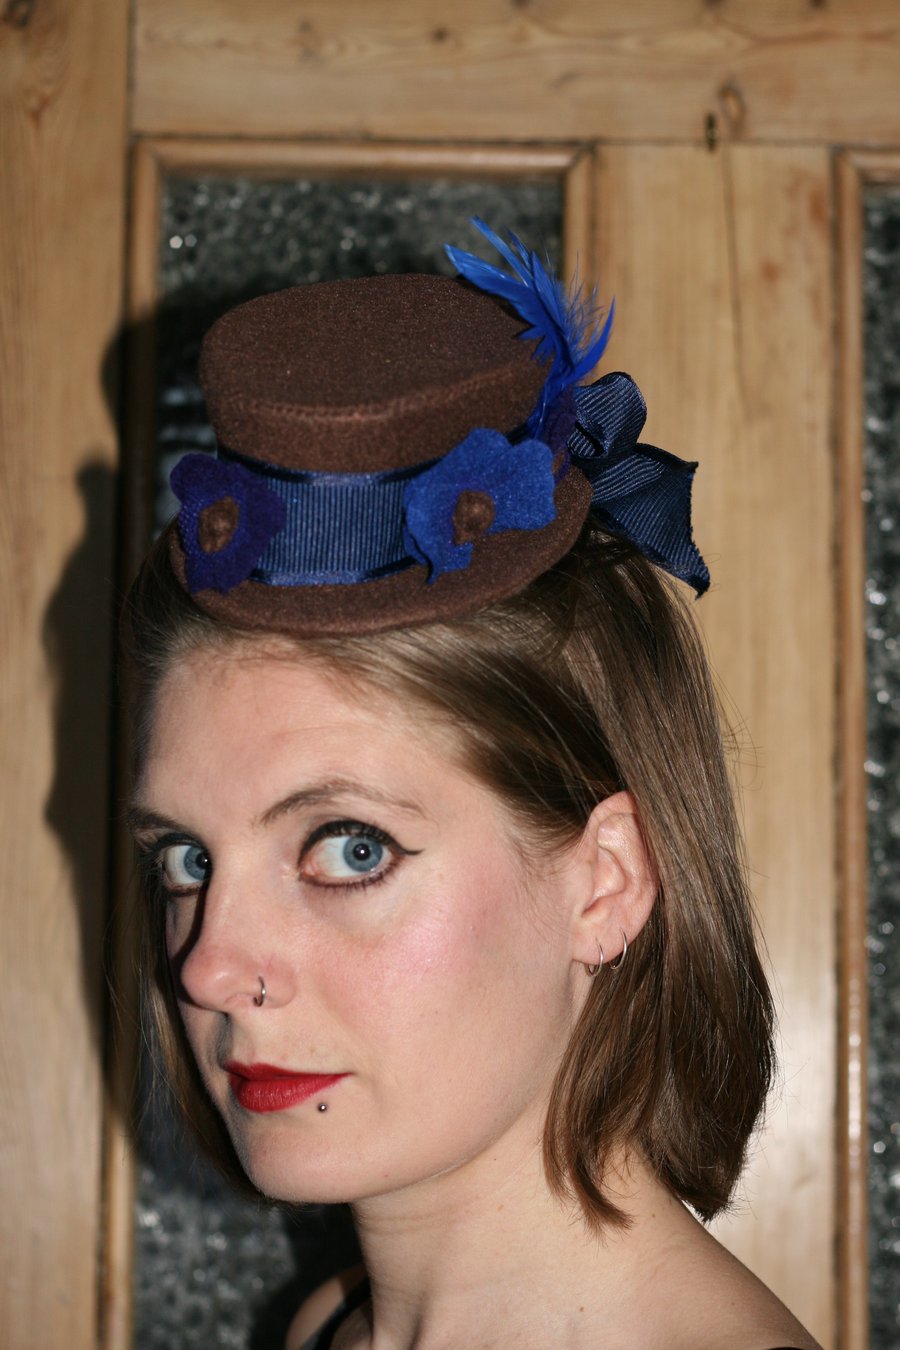 Chocolate brown and navy steampunk mini top hat